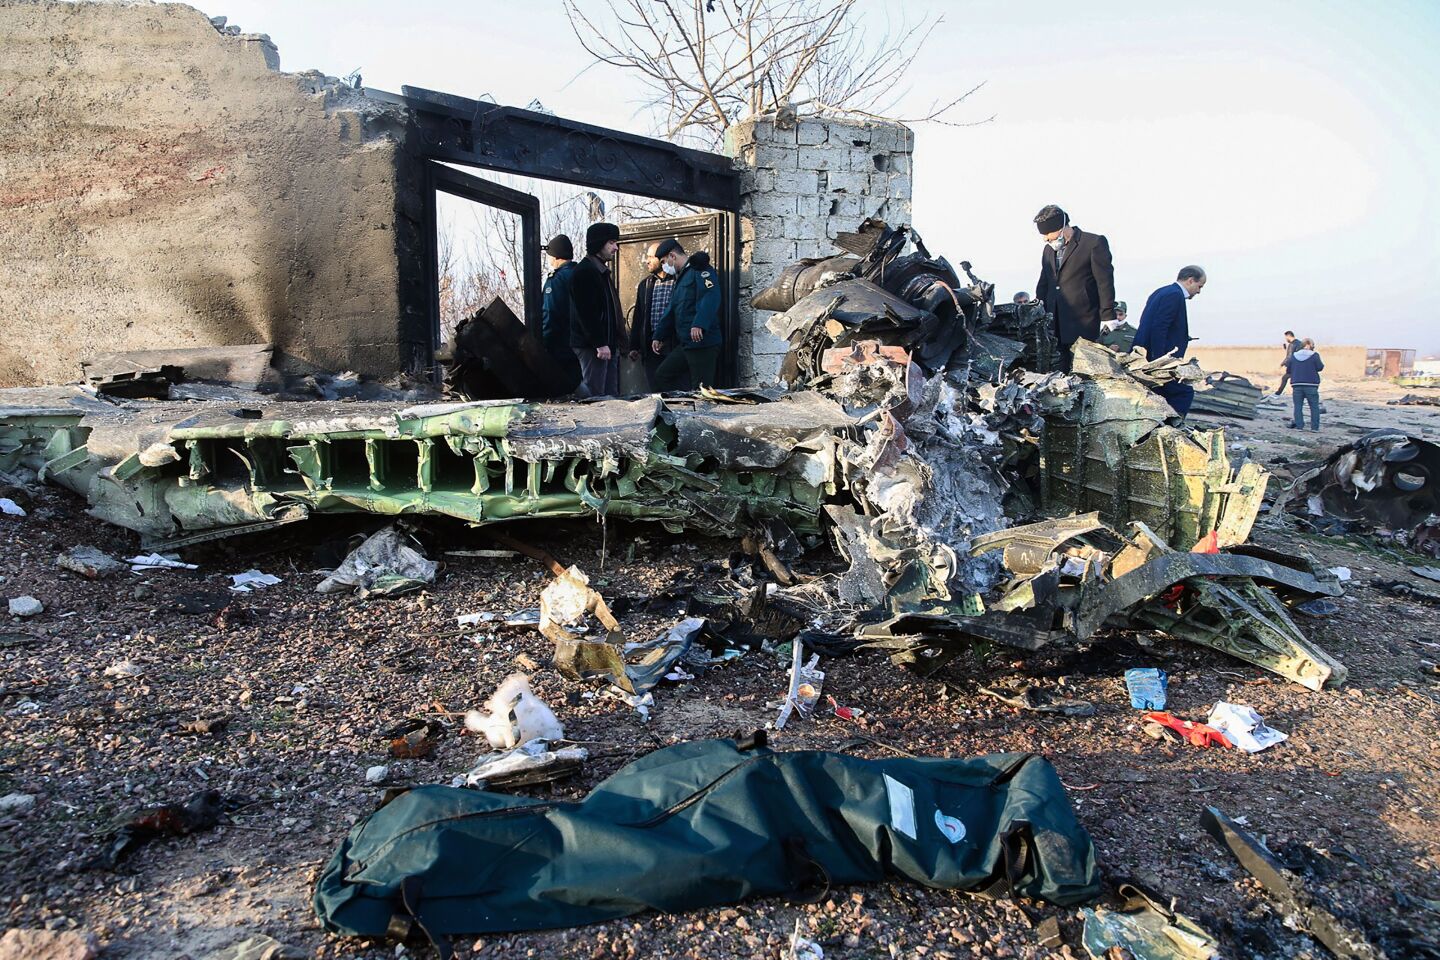 People stand near the wreckage after a Ukrainian plane carrying 176 passengers crashed near Imam Khomeini airport in Tehran on January 8, 2020. - All 176 people on board a Ukrainian passenger plane were killed when it crashed shortly after taking off from Tehran on January 8, Iranian state media reported. State news agency IRNA said 167 passengers and nine crew members were on board the aircraft operated by Ukraine International Airlines. (Photo by ROHHOLLAH VADATI / ISNA / AFP) (Photo by ROHHOLLAH VADATI/ISNA/AFP via Getty Images)